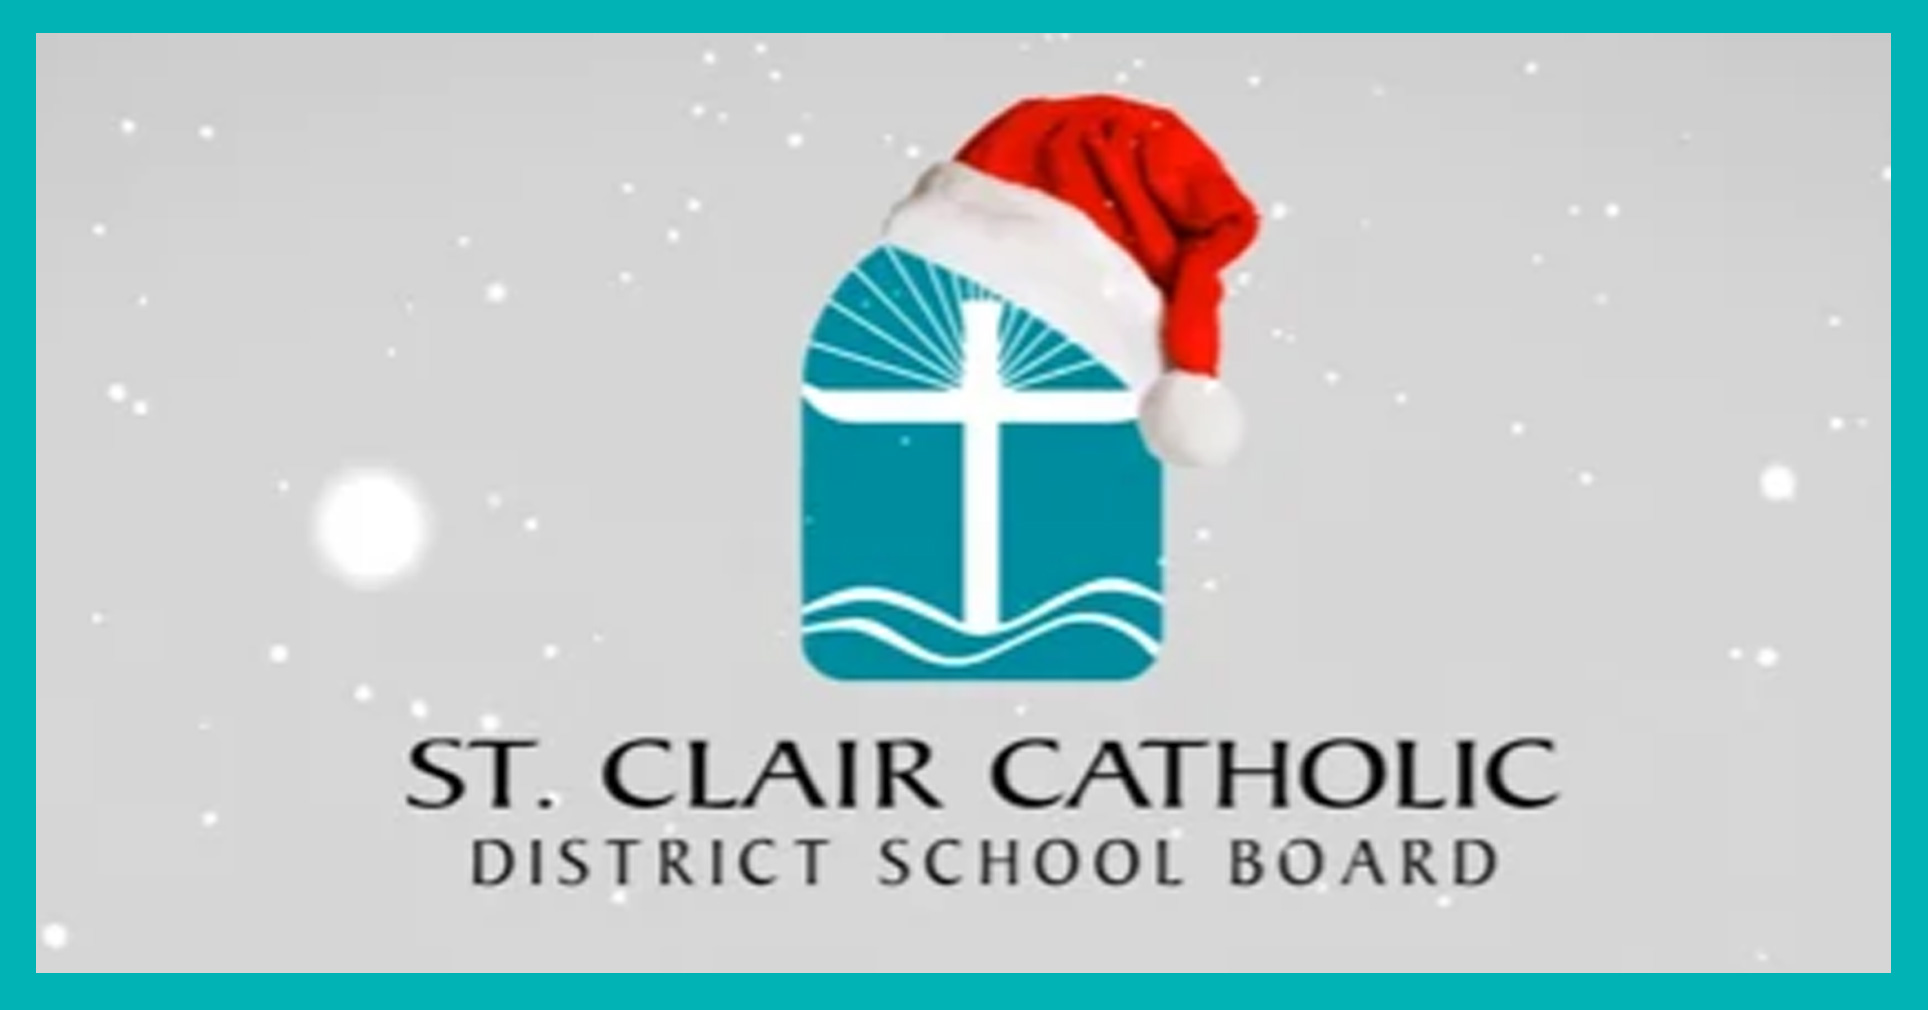 Deb Crawford’s Christmas Message to Parents/Guardians